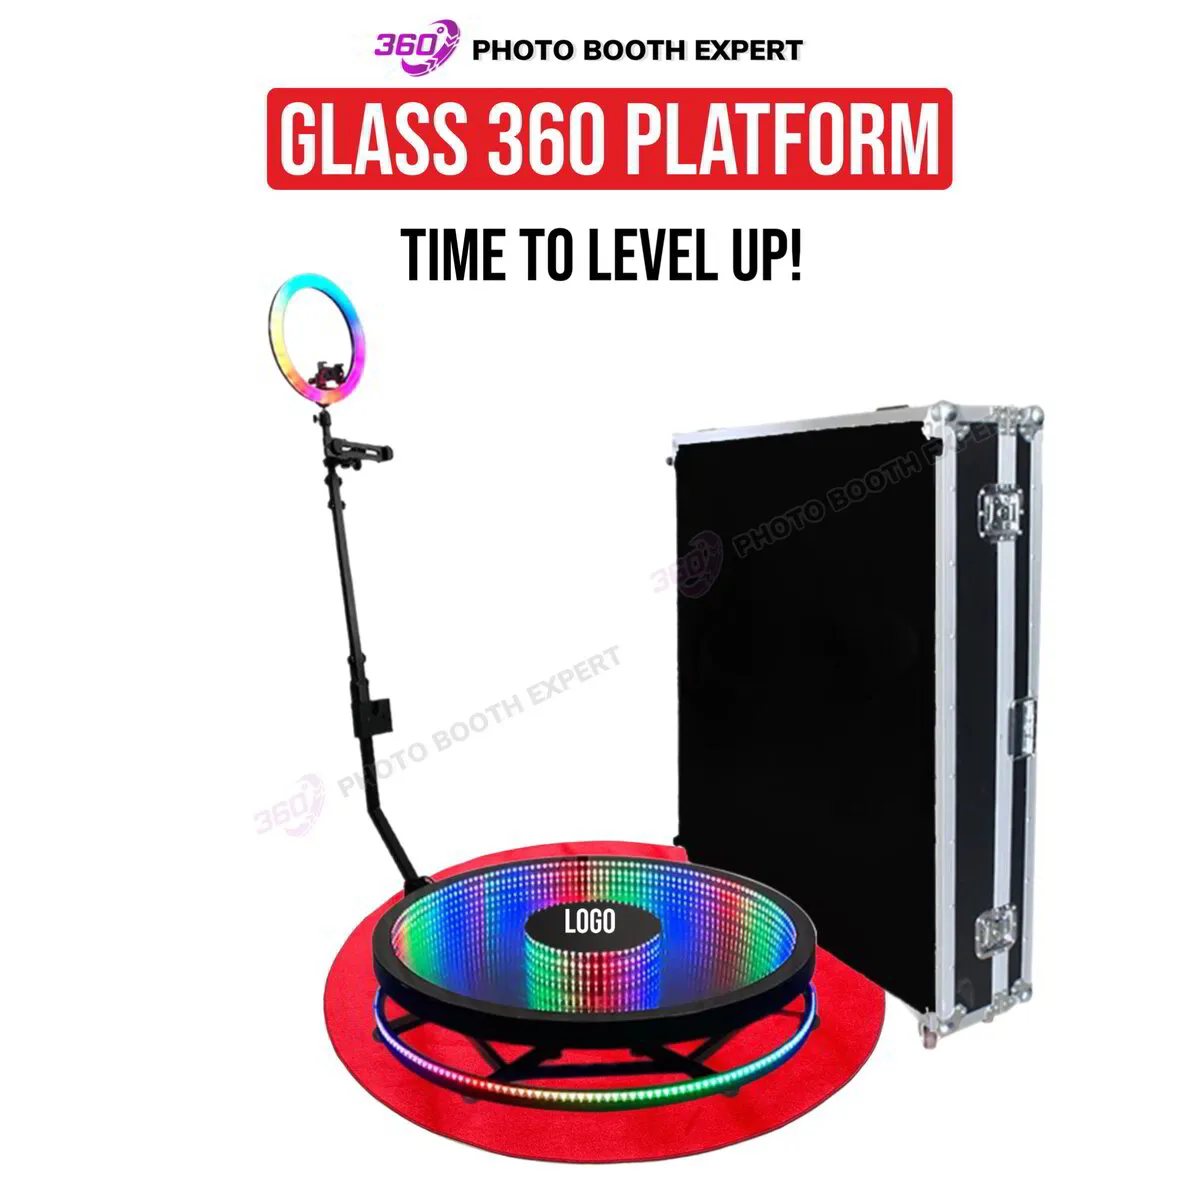 Classic Black Glass 360 Photo Booth 